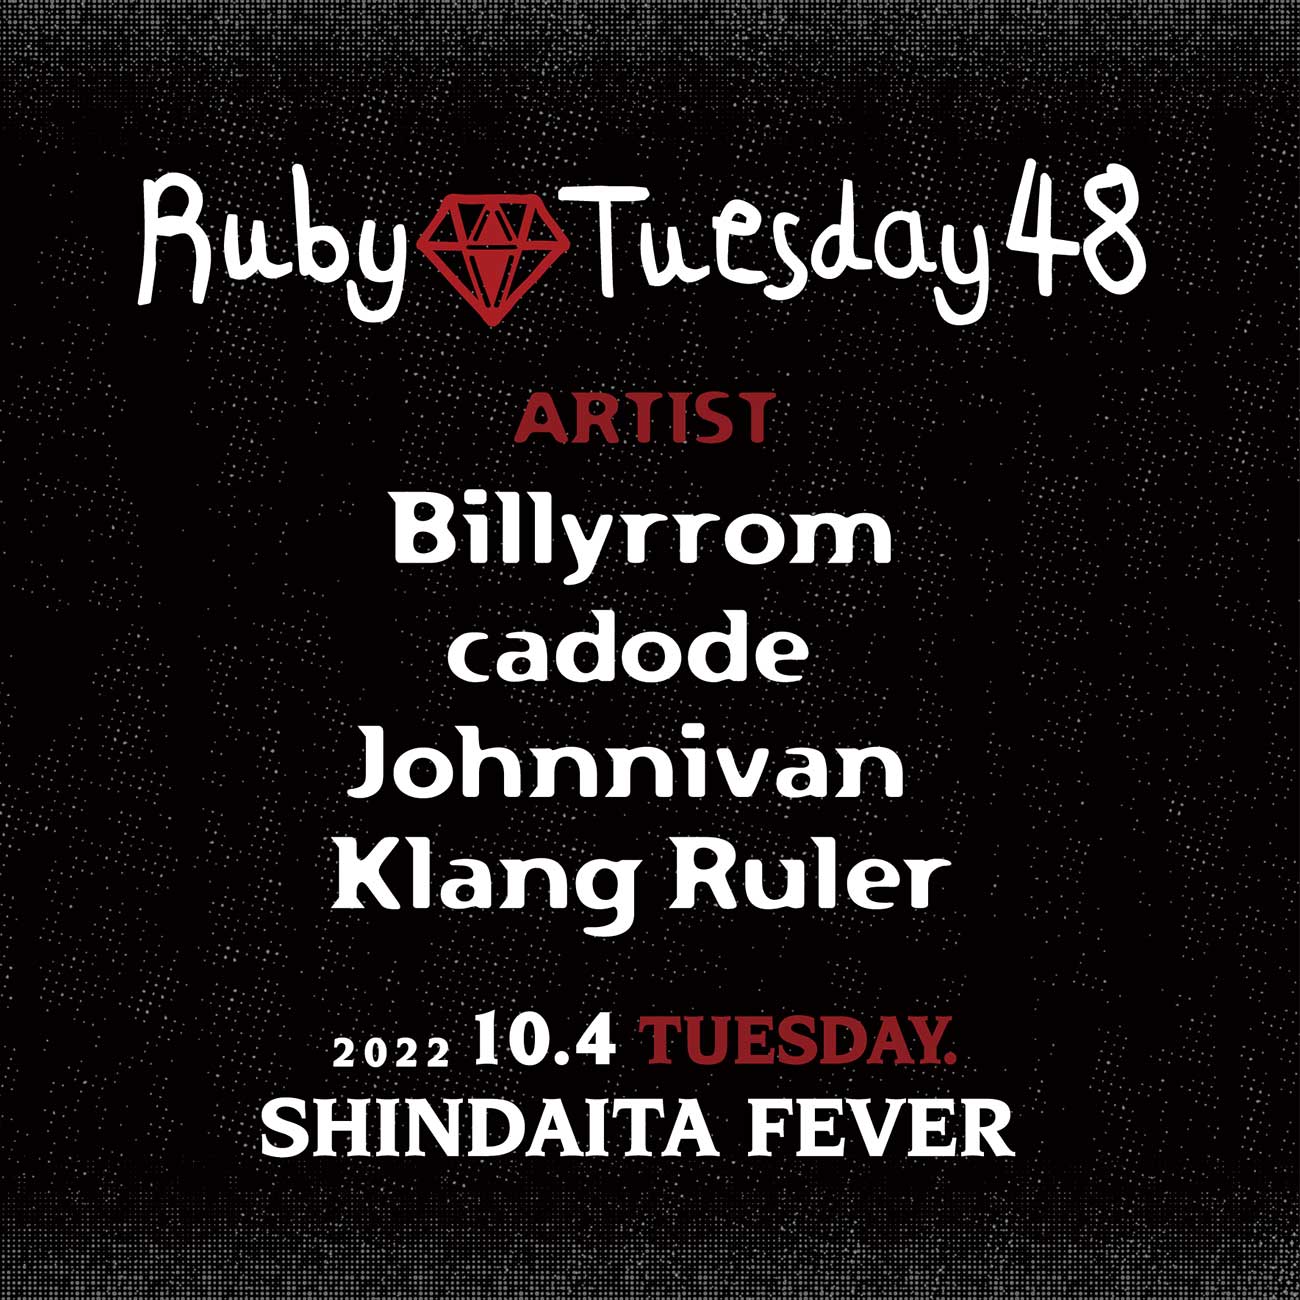 Ruby Tuesday 48